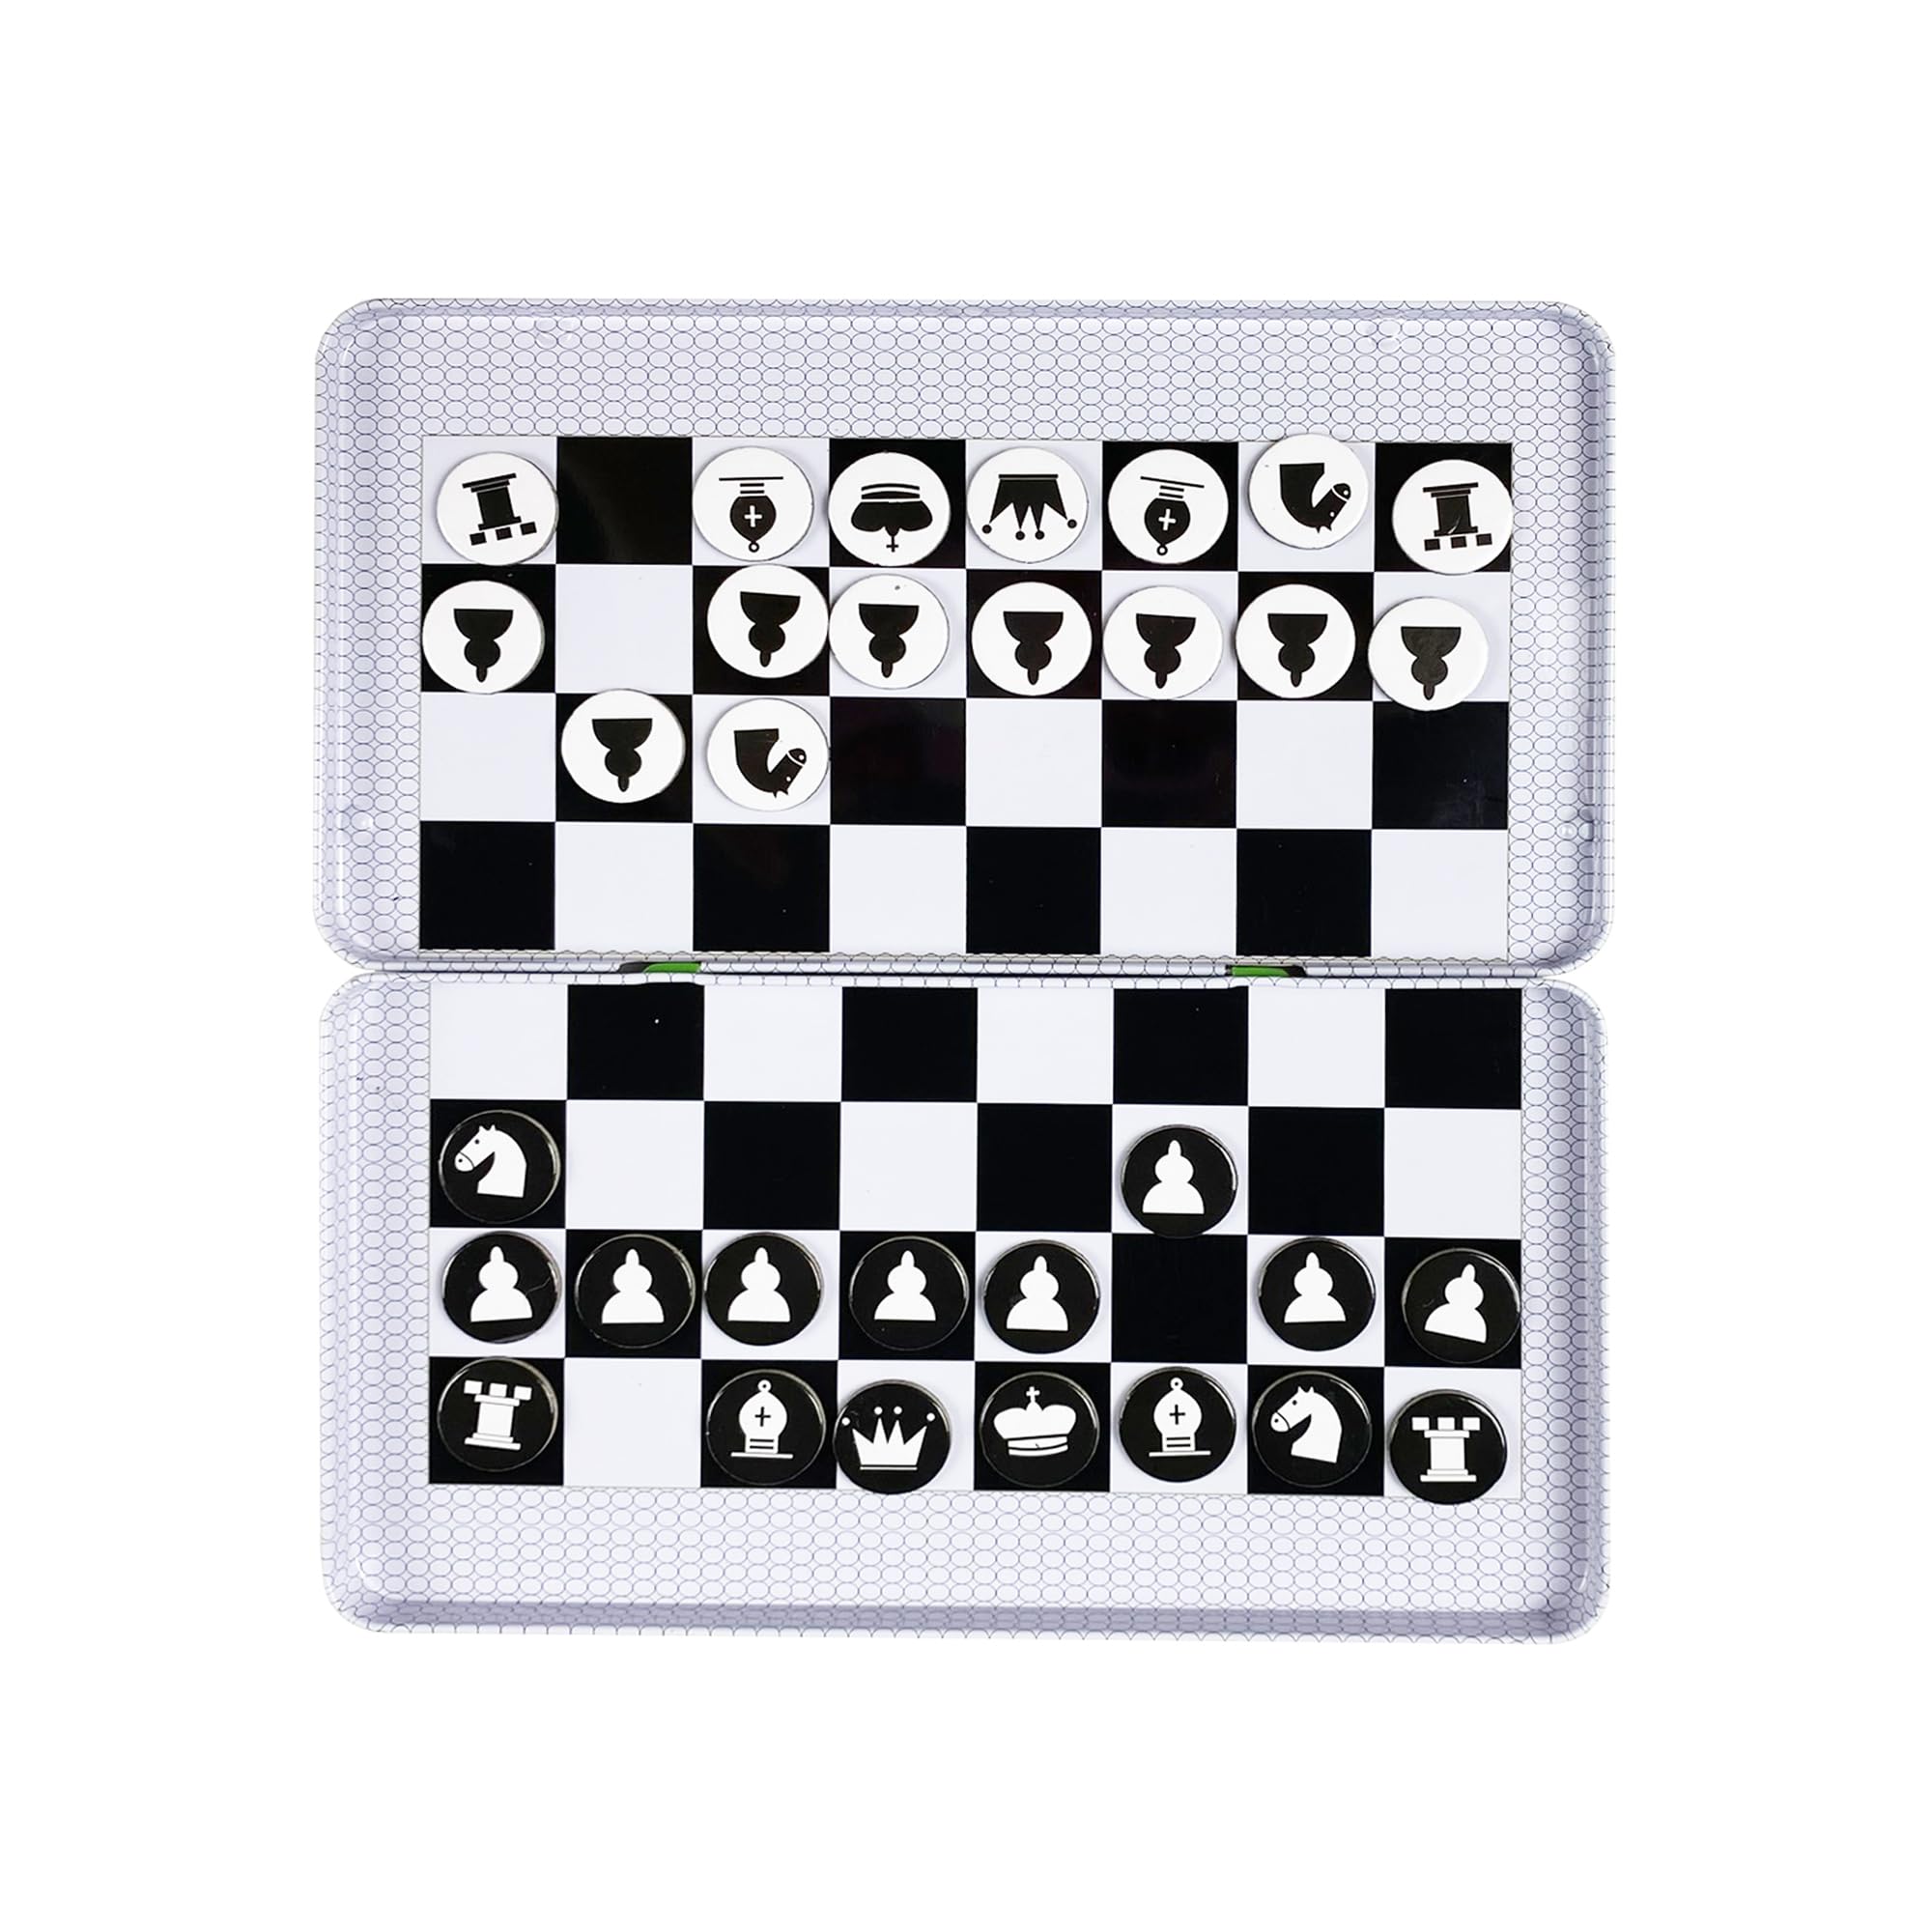 The Purple Cow- Magnetic Chess Game for kids and adults. Travel size, lightweight game for hours of fun - Portable mini game - Ideal for travelling